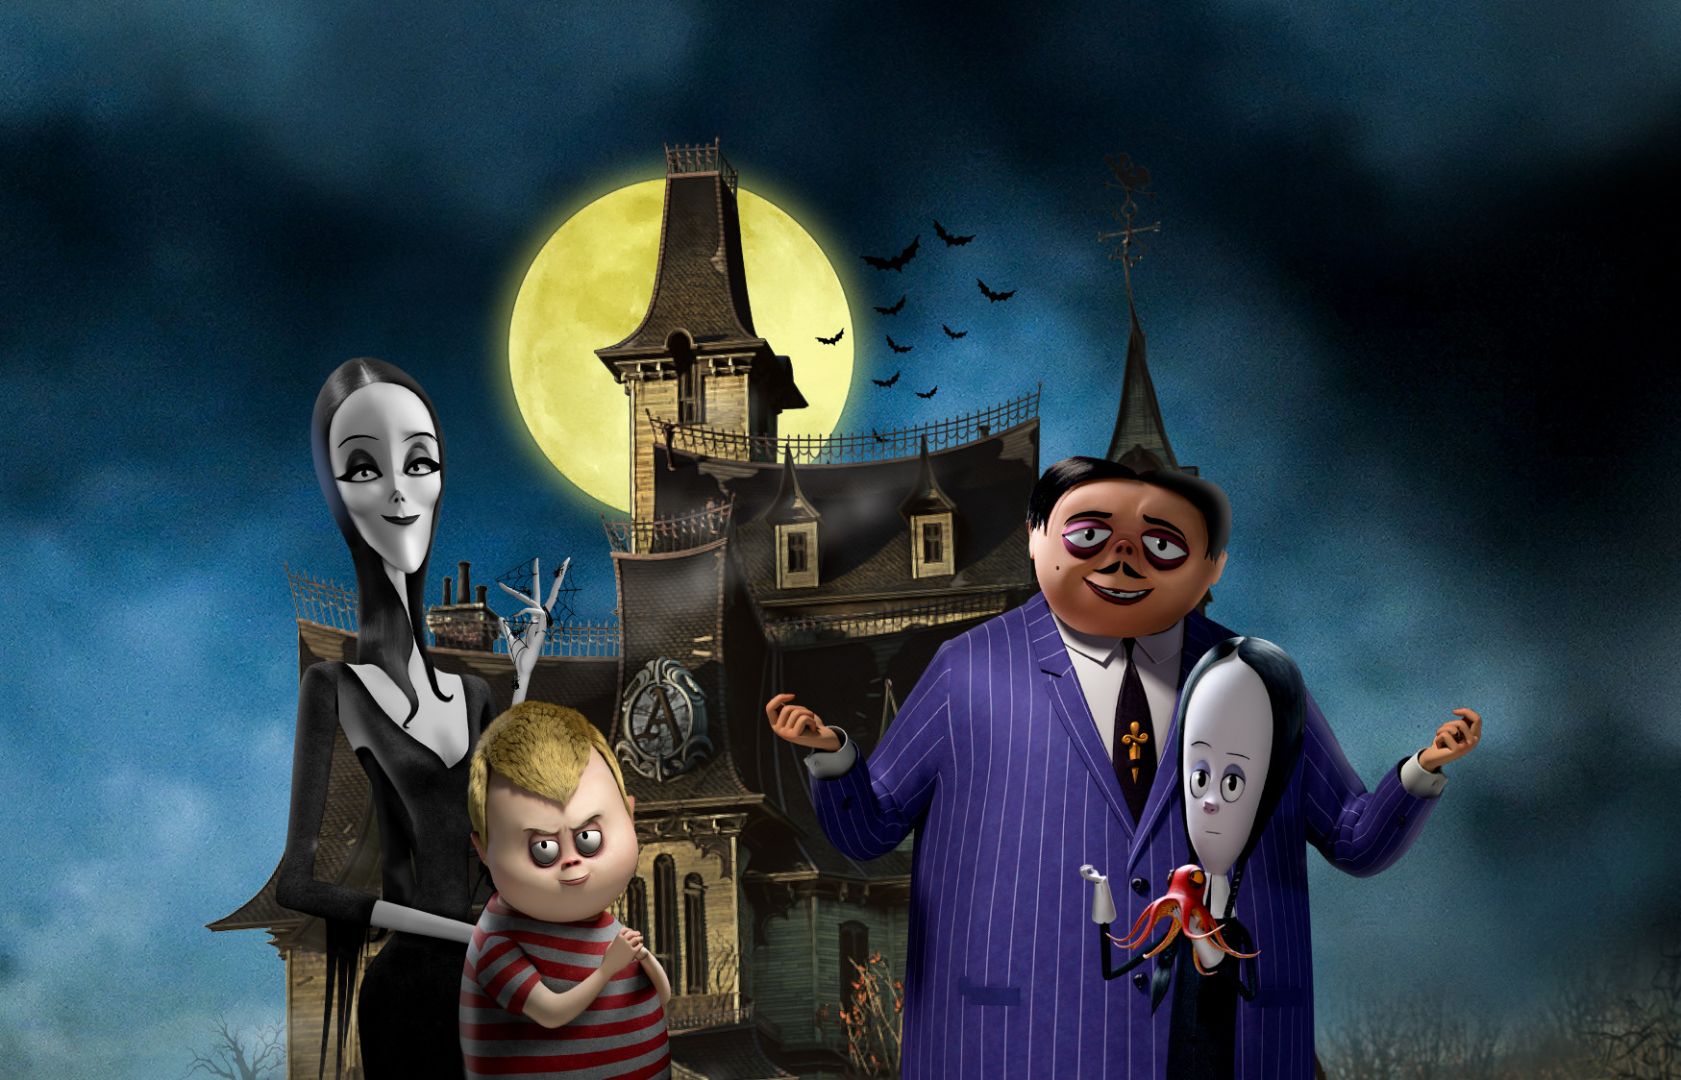 Co-Optimus - News - The Addams Family: Mansion Mayhem Will Get Creepy,  Kooky, and Co-Op in September